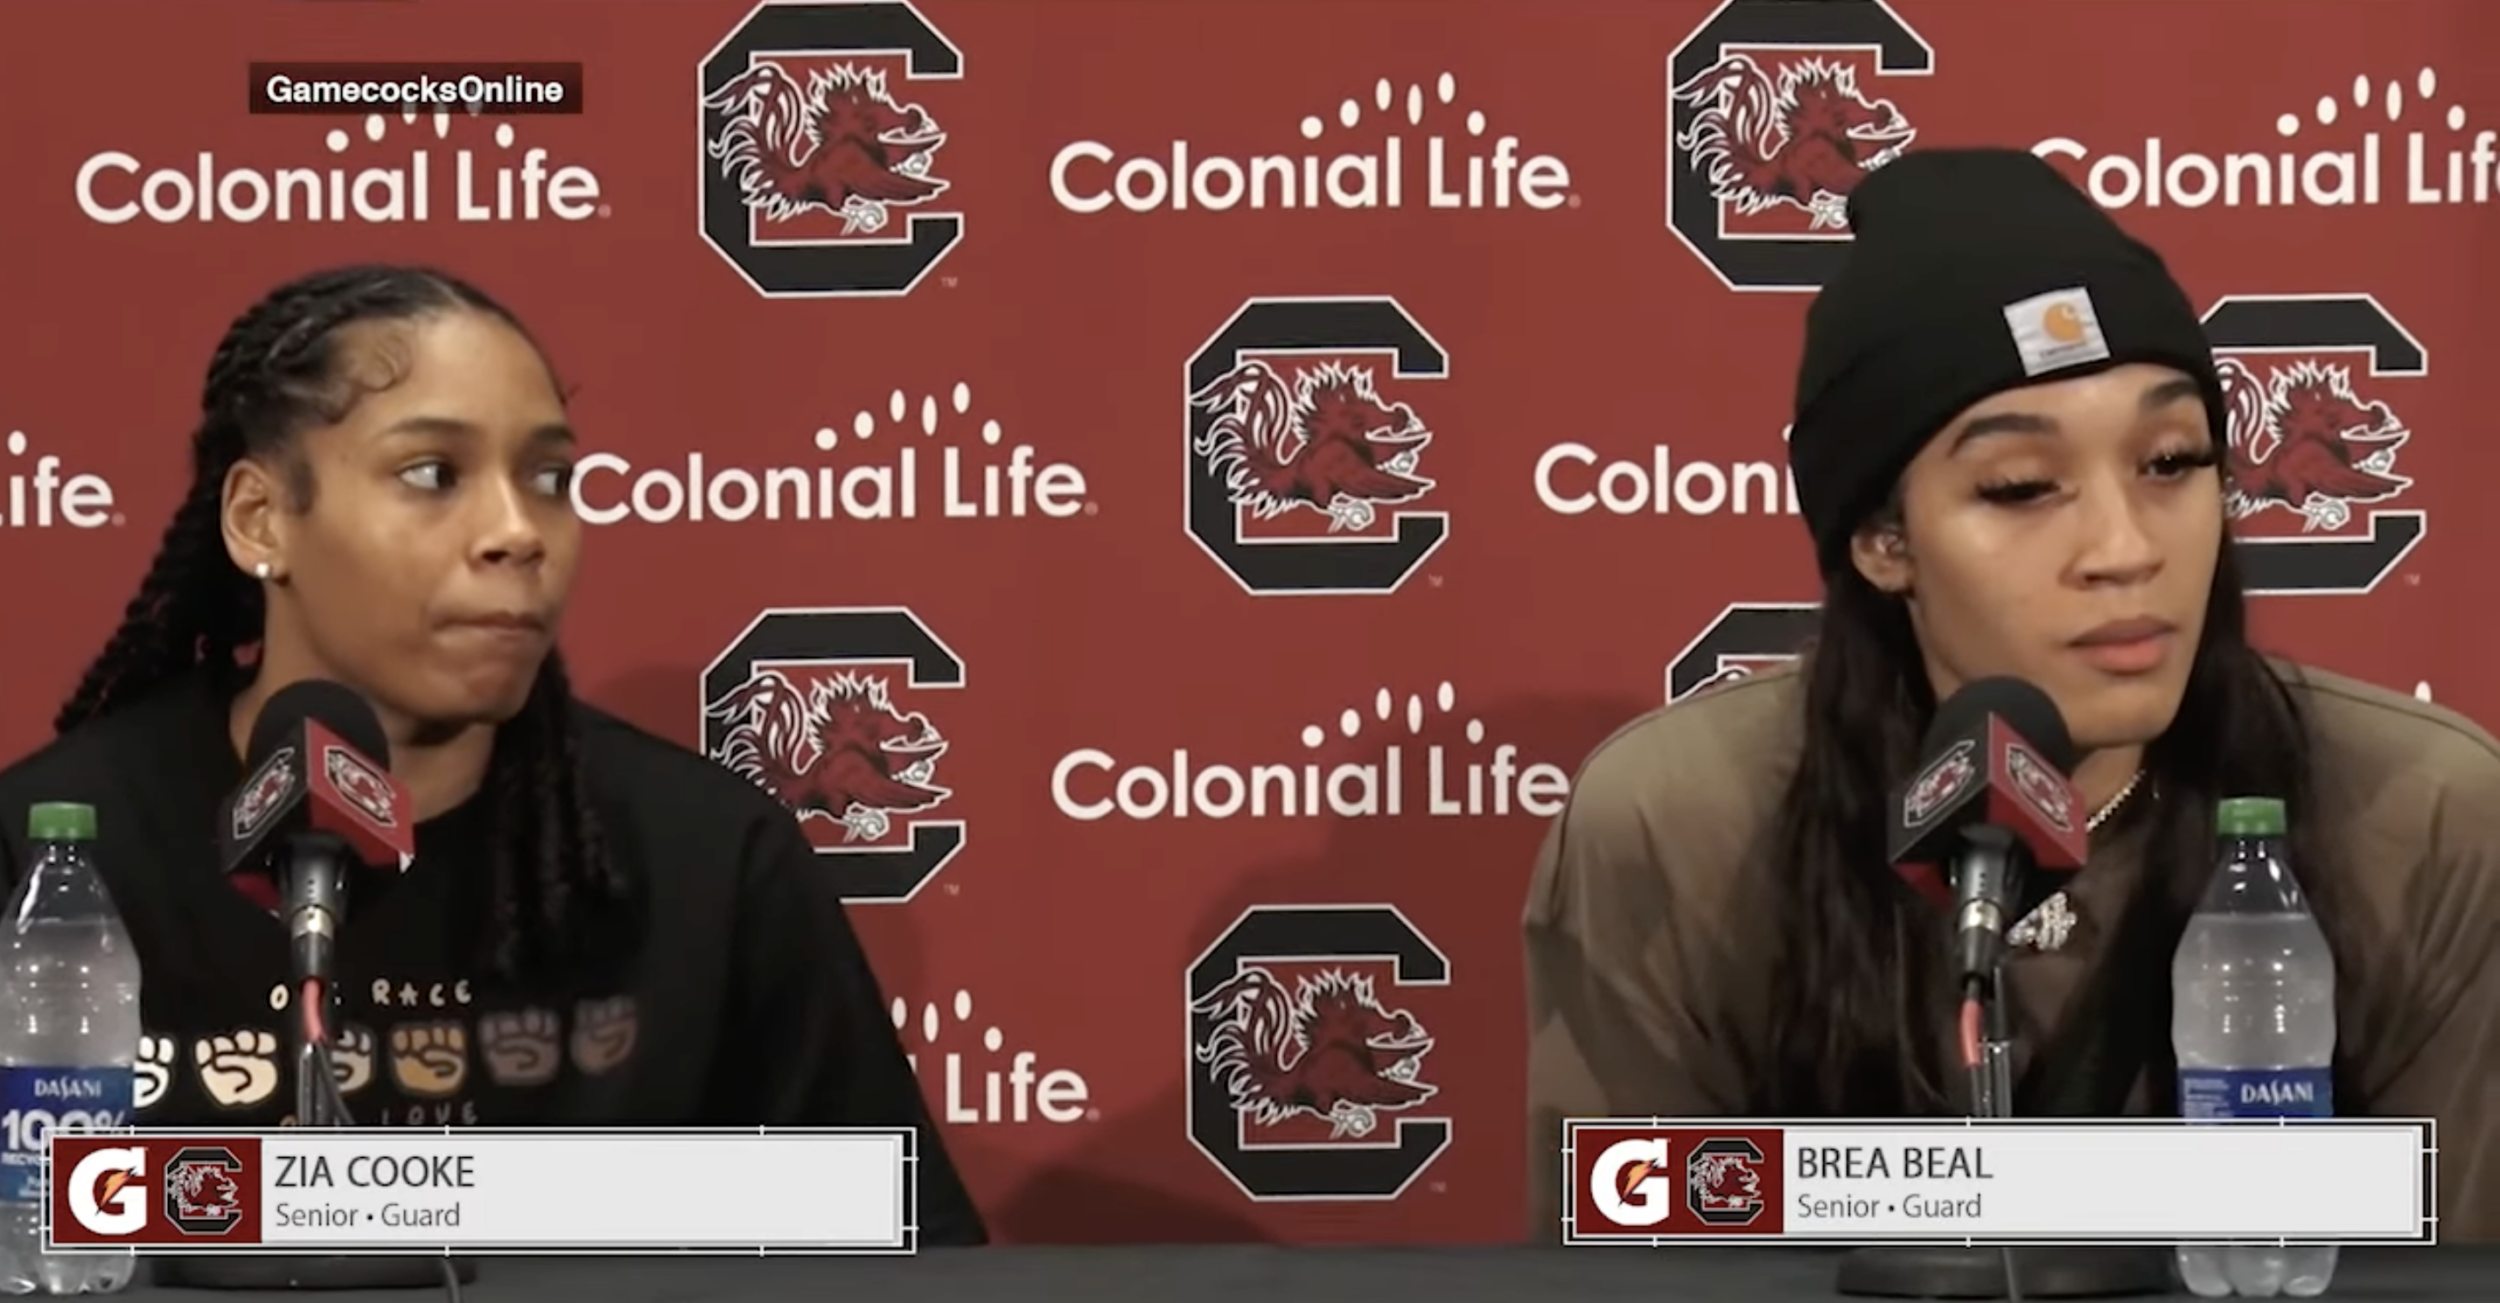 PostGame News Conference: (Florida) - Zia Cooke and Brea Beal